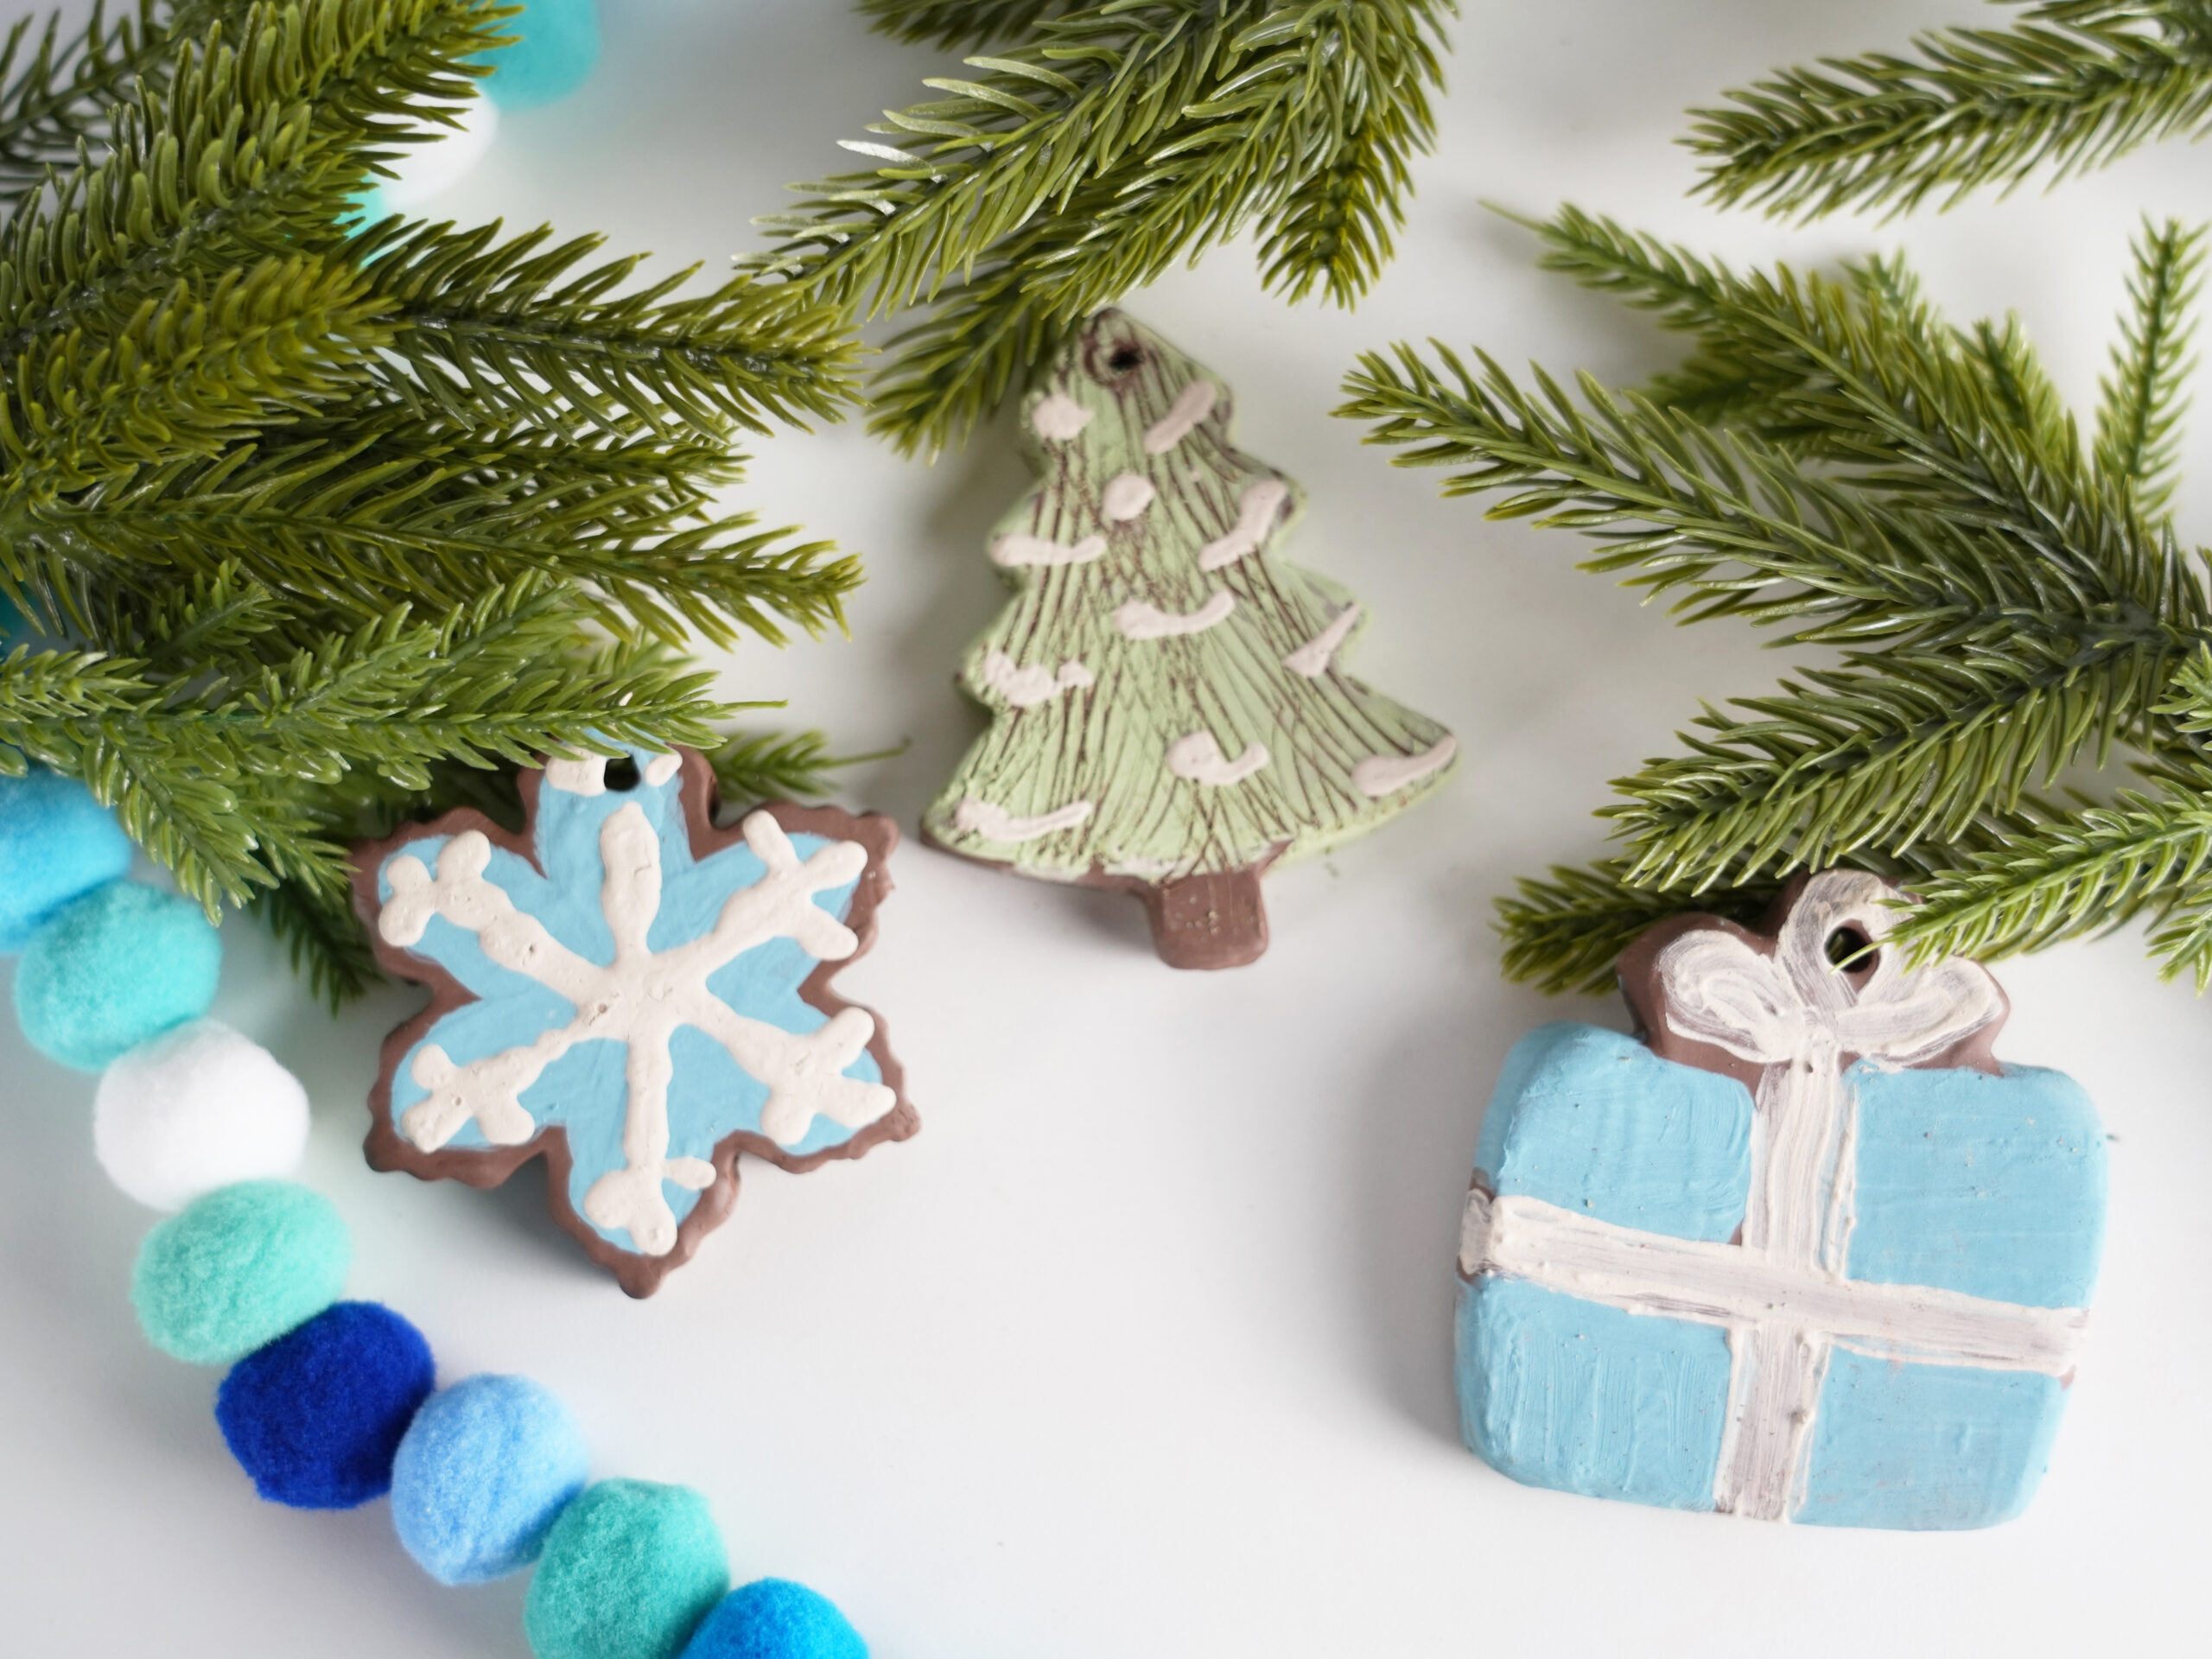 Photo of clay ornaments shaped like a snowflake, Christmas tree, and wrapped gift hanging on tree limbs.